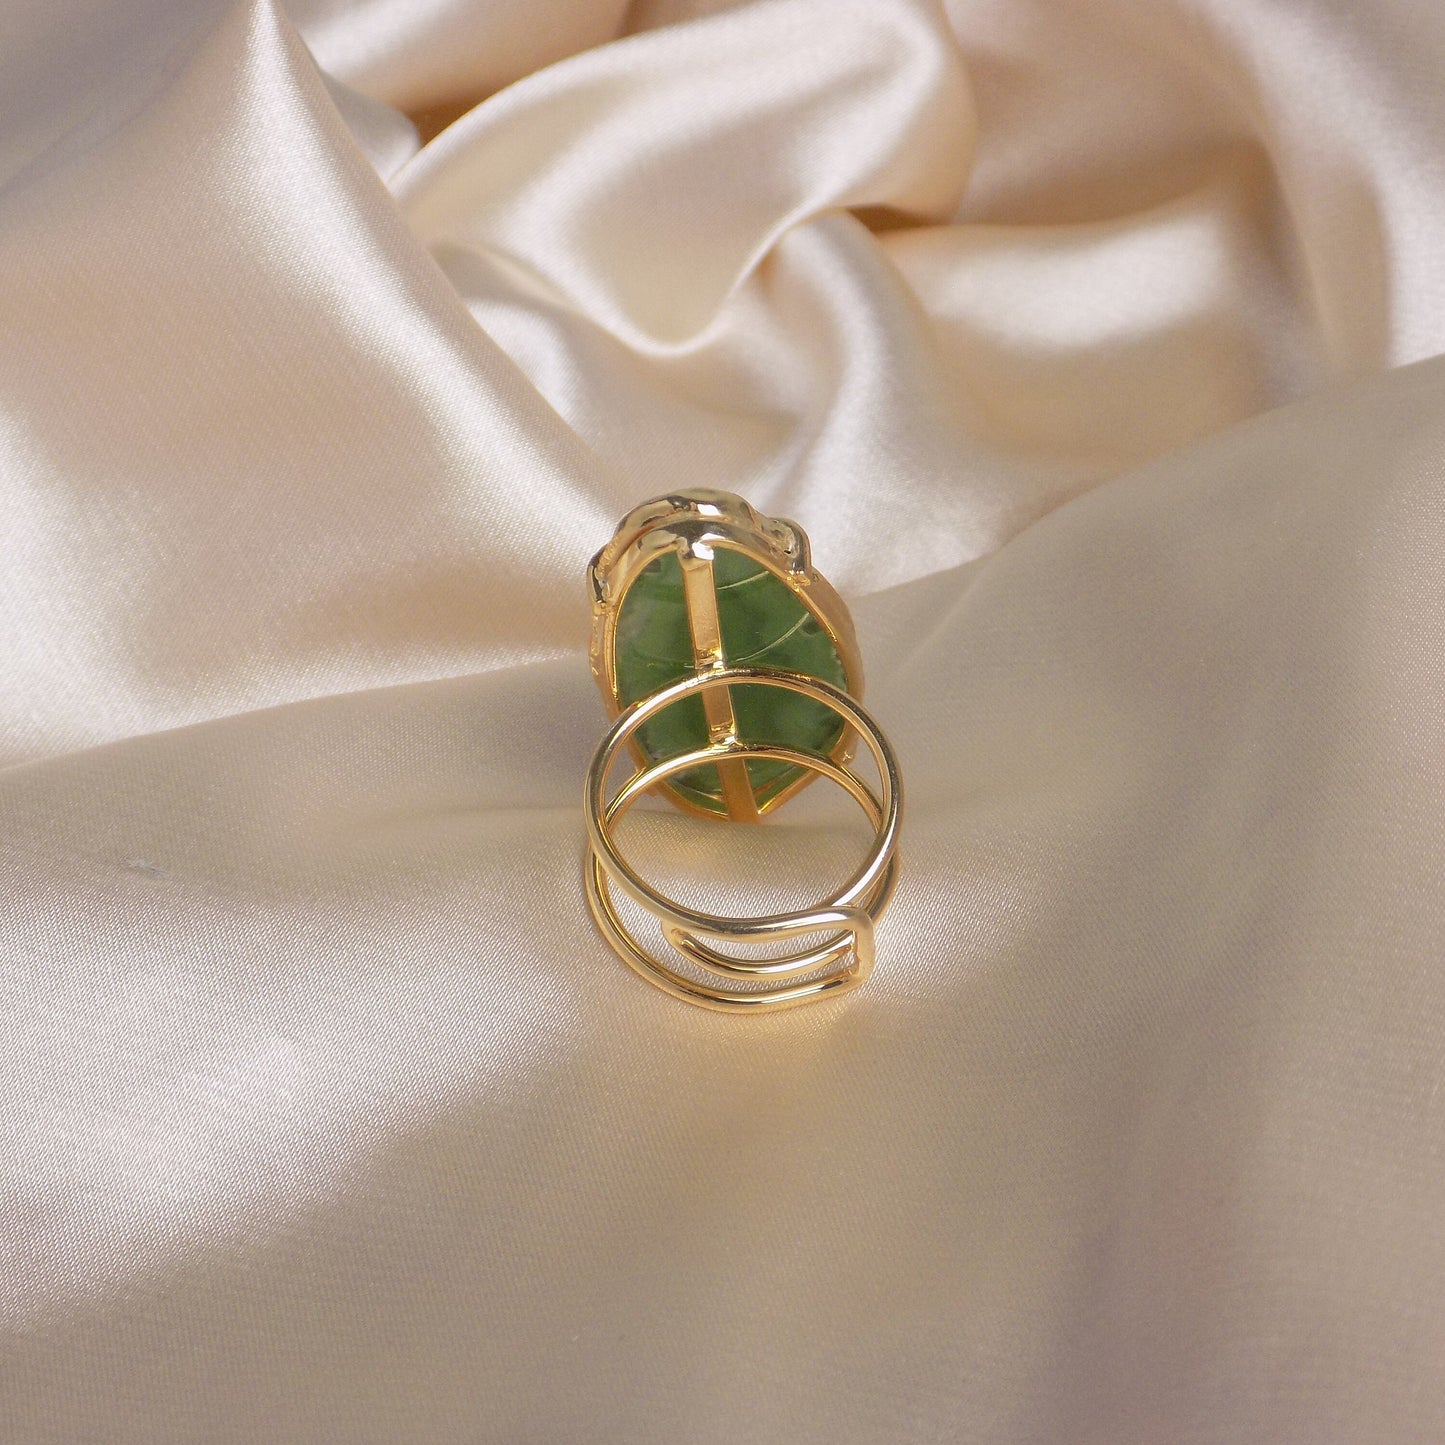 Unique Green Agate Ring Statement, Sliced Geode Ring, Boho Large Stone, Raw Crystal Ring Gold Adjustable, G15-163